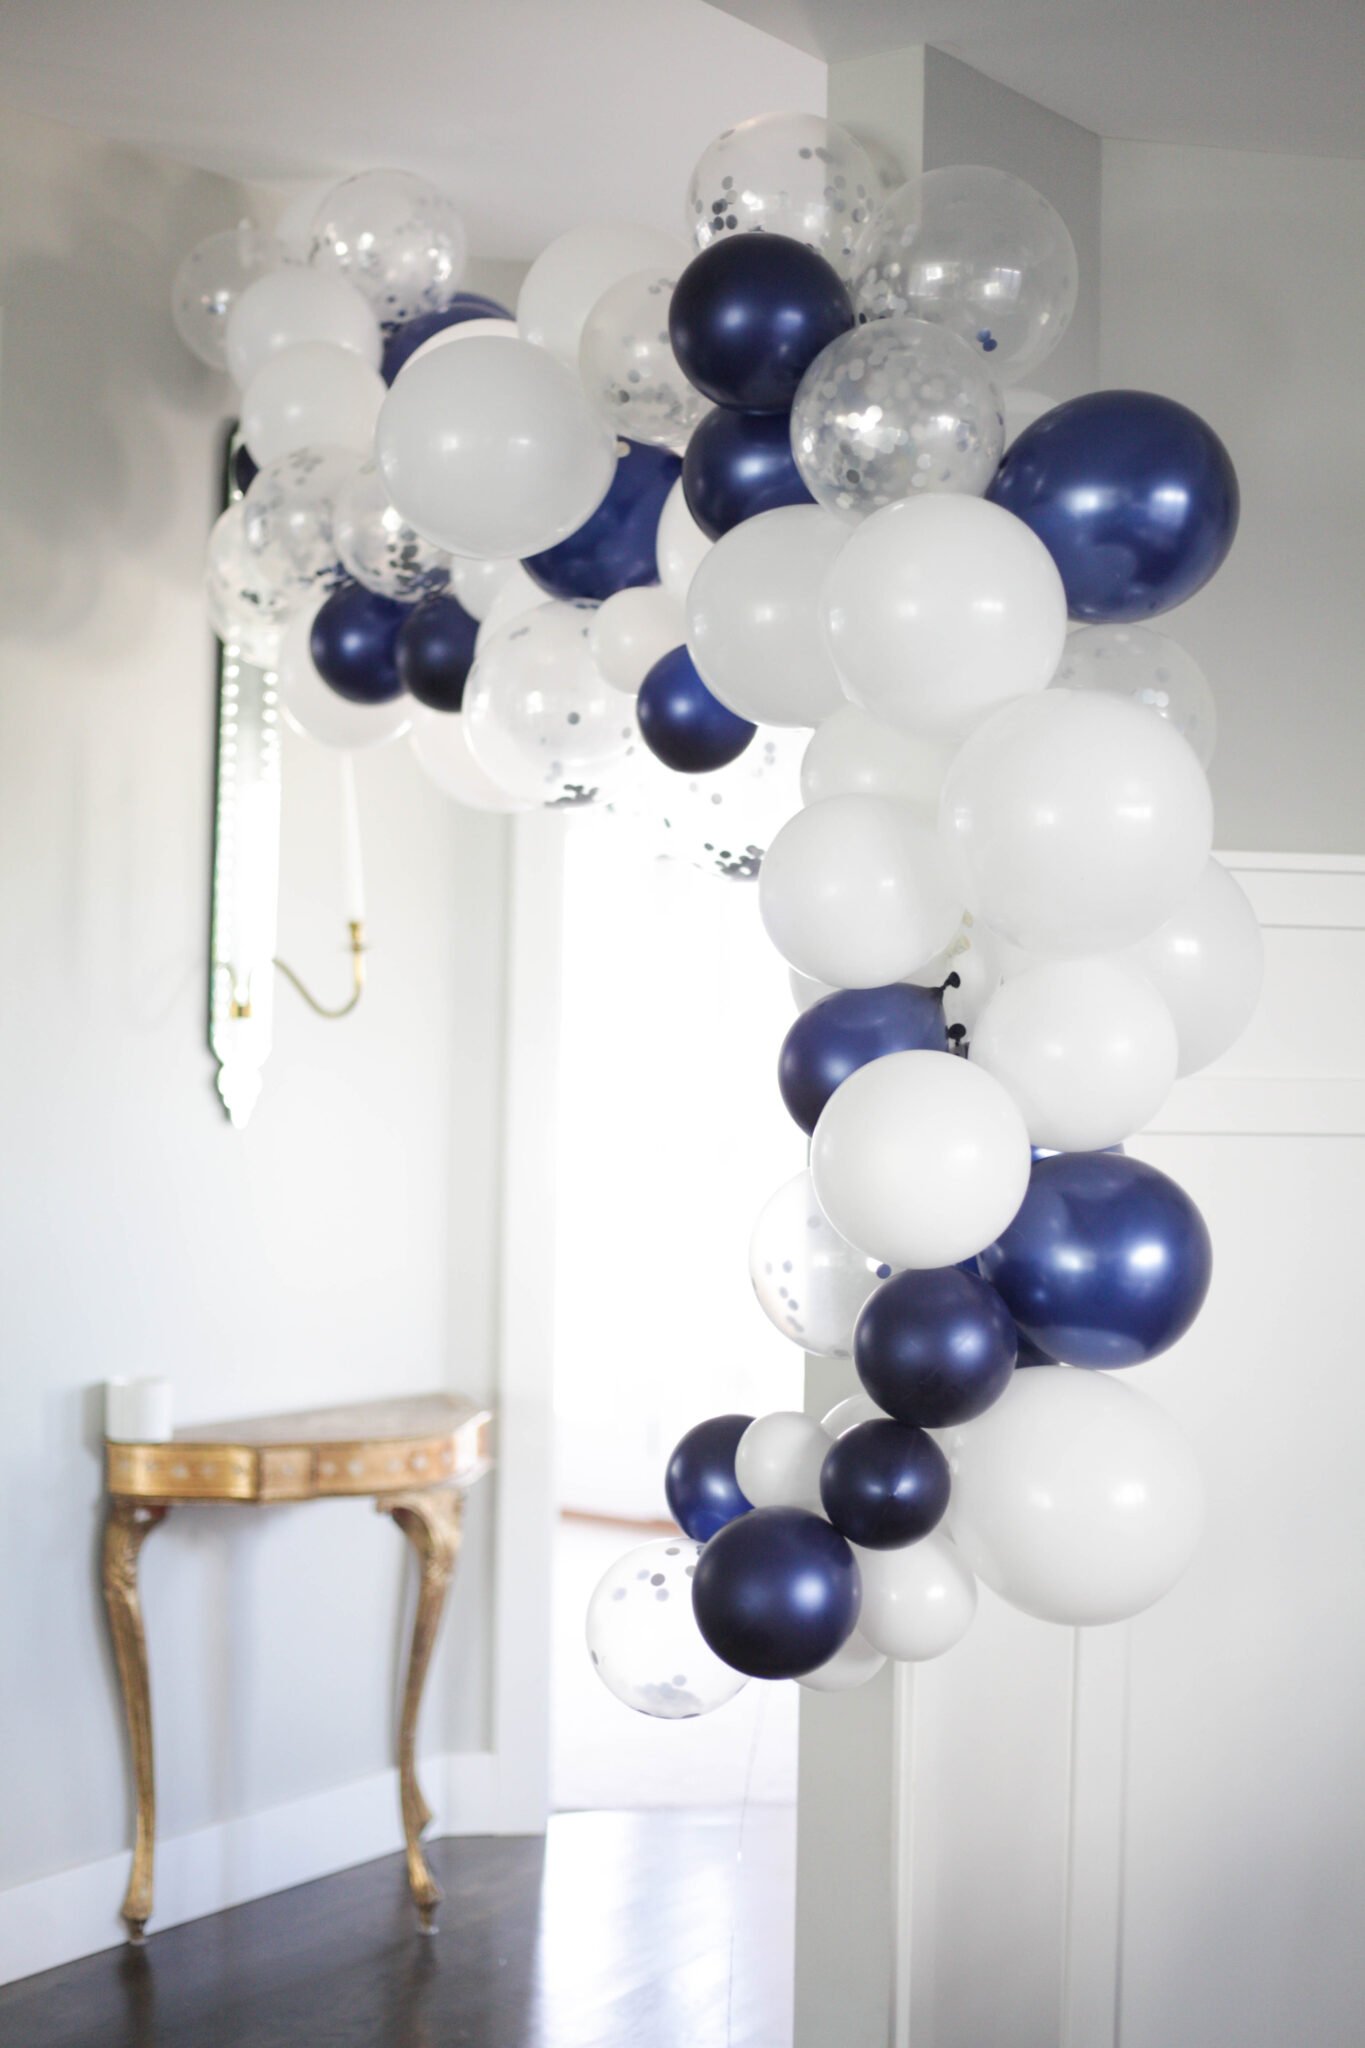 How to create the perfect balloon arch for your party with glue